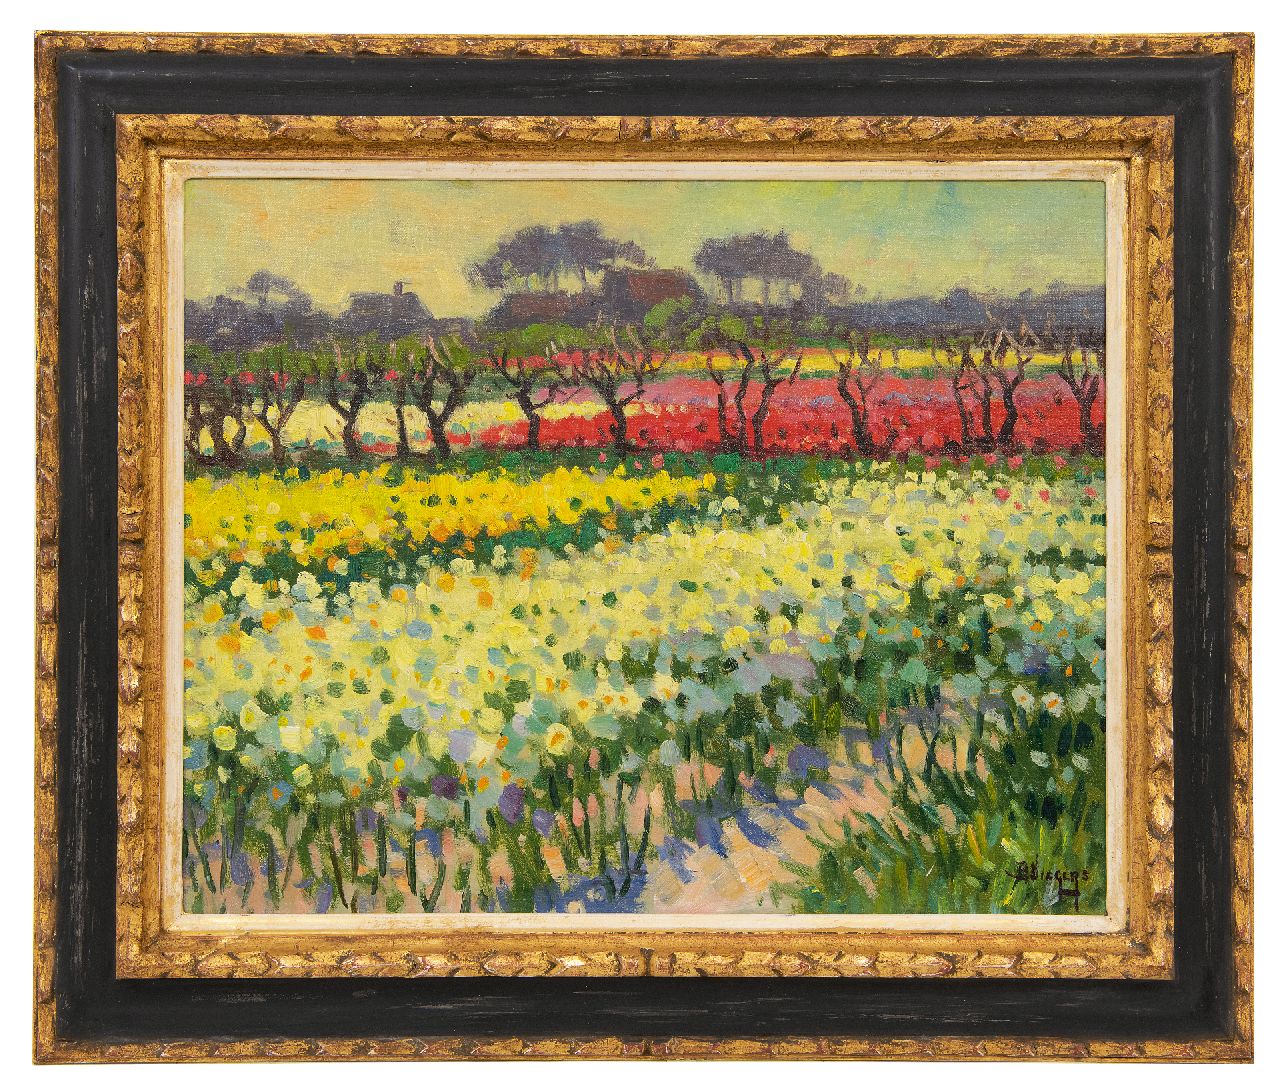 Viegers B.P.  | Bernardus Petrus 'Ben' Viegers, Narcissus- and tulip fields in Bakkum, North Holland, oil on canvas 40.6 x 50.6 cm, signed l.r.